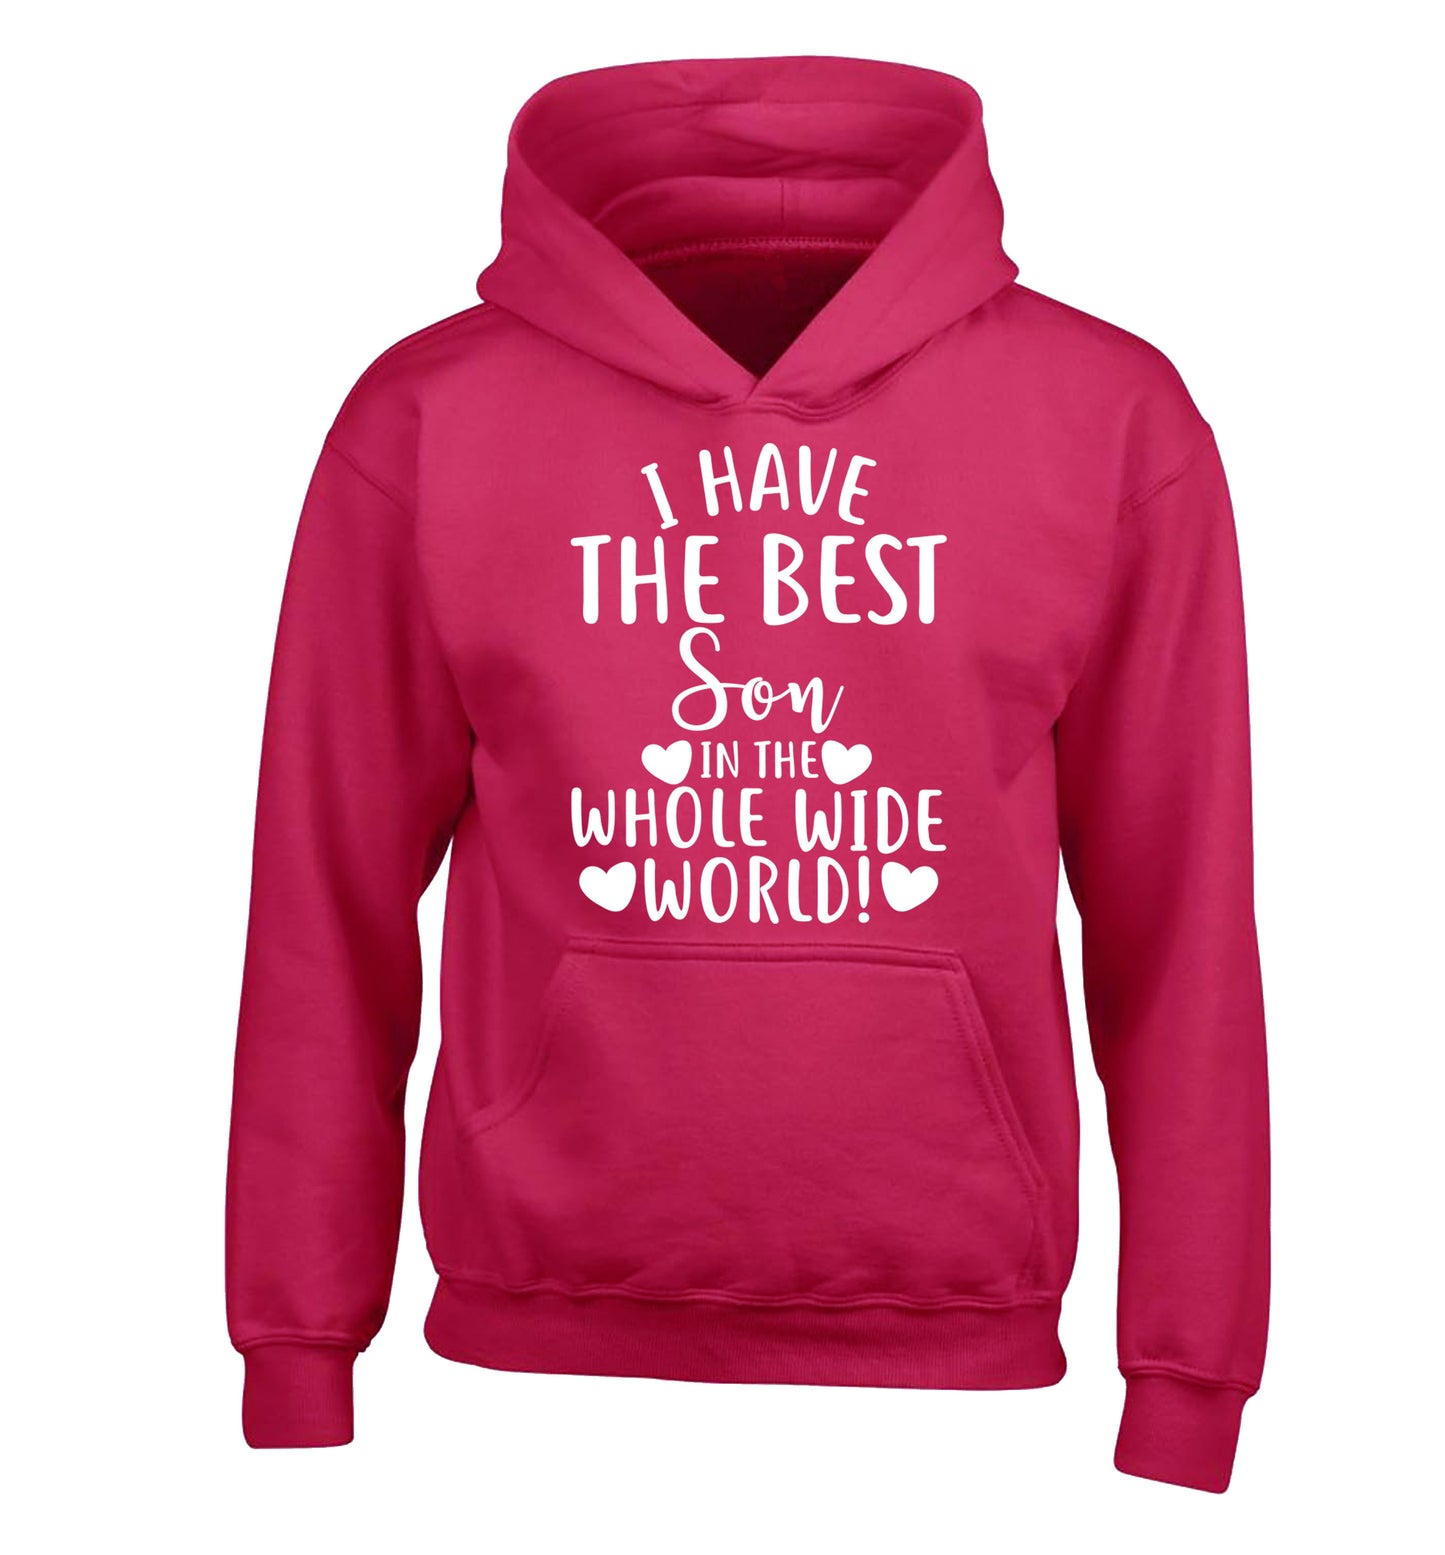 I have the best son in the whole wide world! children's pink hoodie 12-13 Years